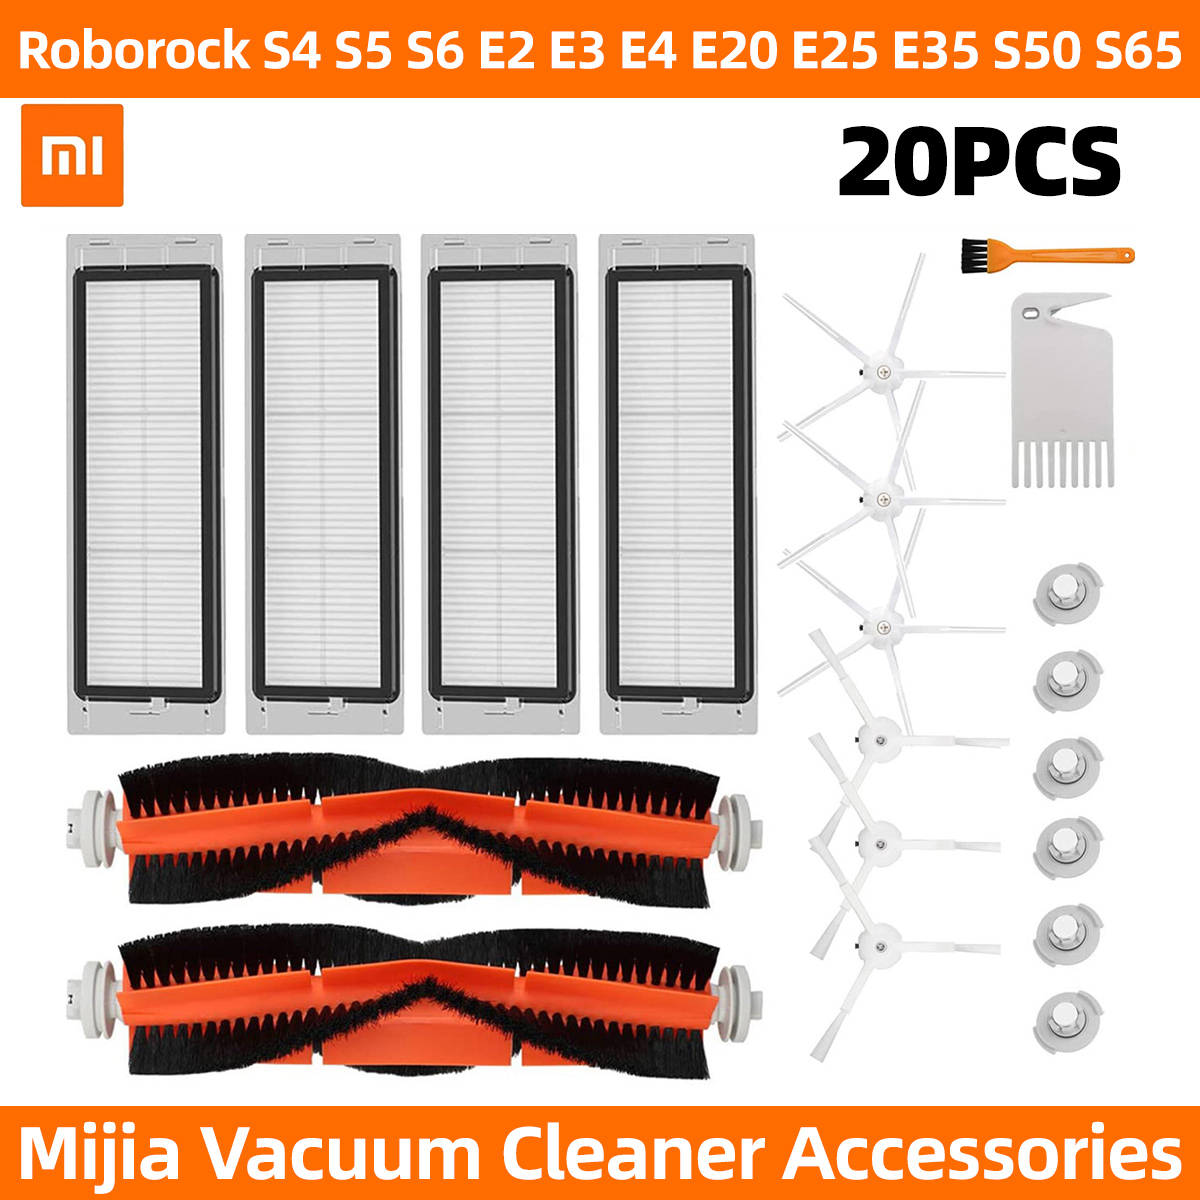 20pcs Replacements for Roborock S4 S5 S6 E4 E20 E25 E35 S50 S65 Xiaomi Mi Mijia Robotic Vacuum Cleaner Parts Accessories Roller Brush*2 Side Brush*6 Filter*10 Cleaning Tool*2 [Not-original]